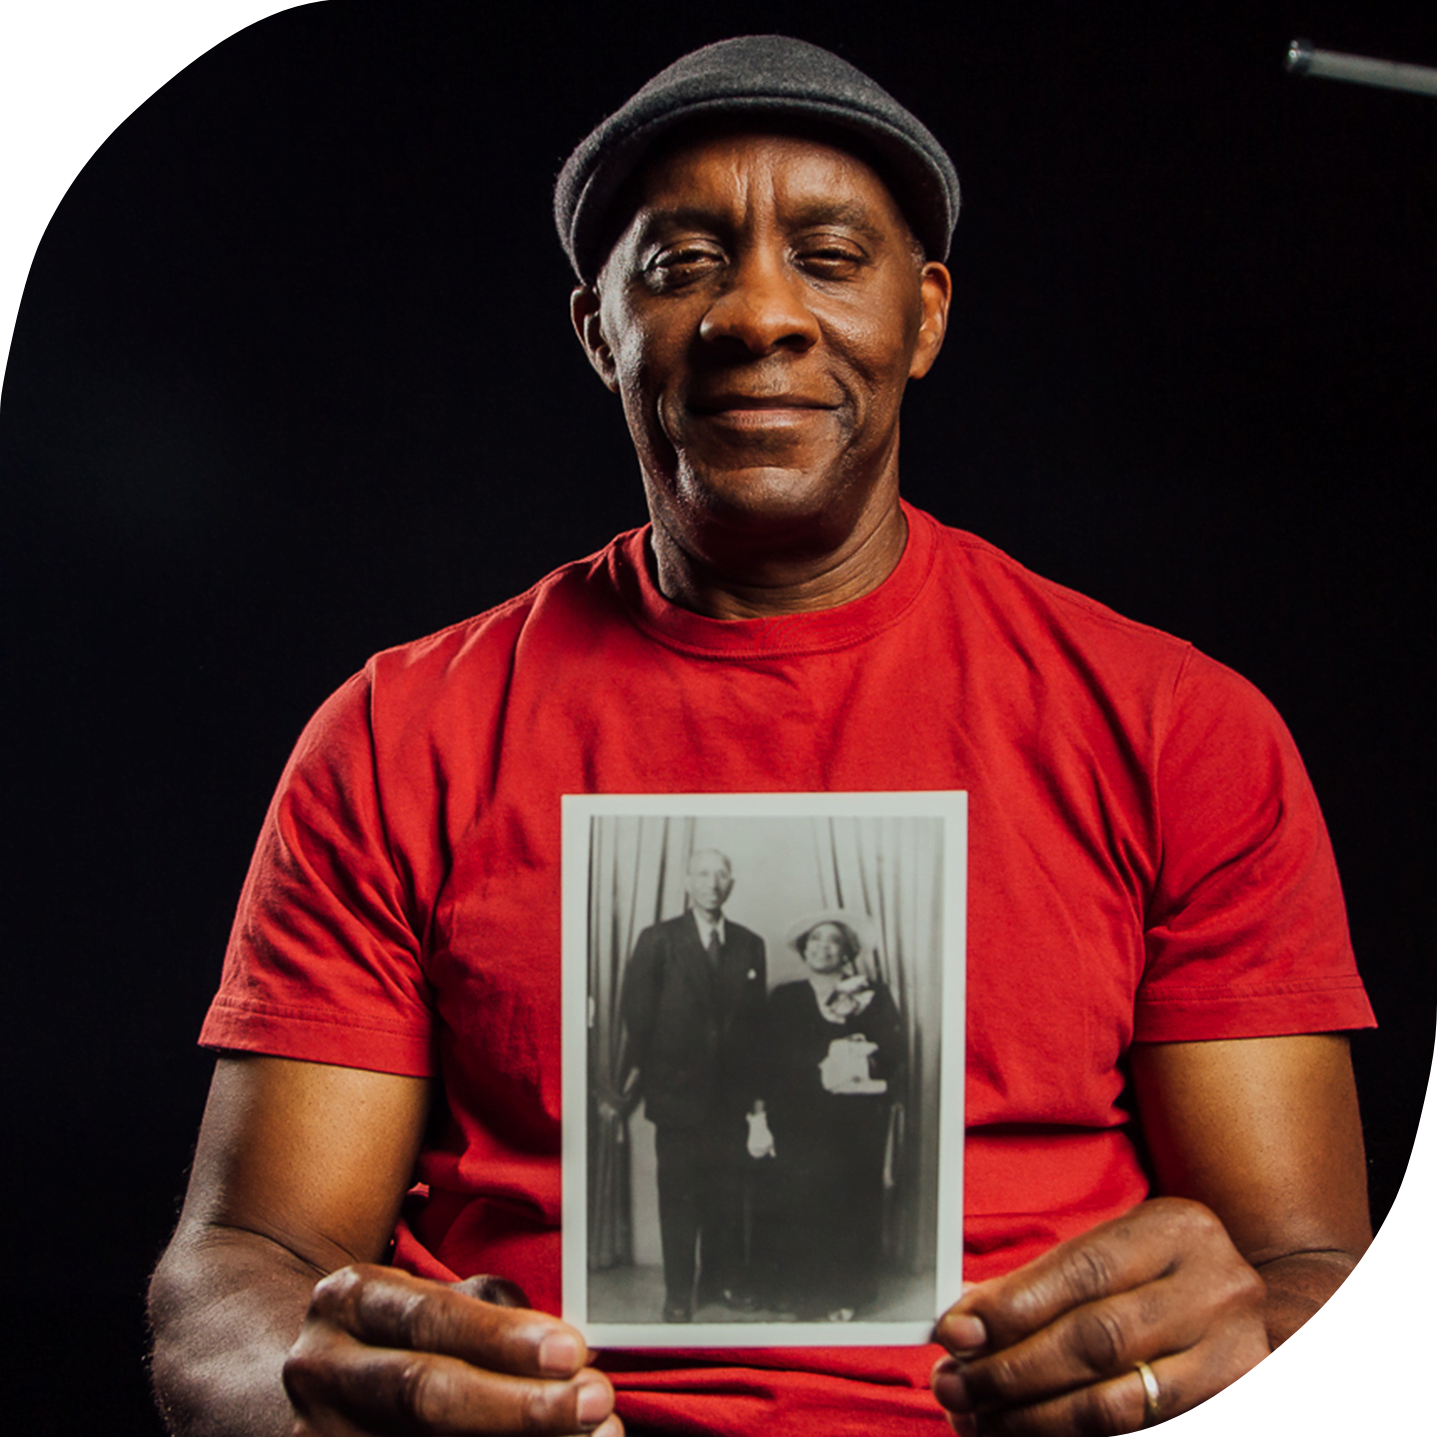 A photo of Anthon Brown, a Black man in his 60s who is wearing an orange shirt and hat. He is holding a black and white photo of his grandparents.